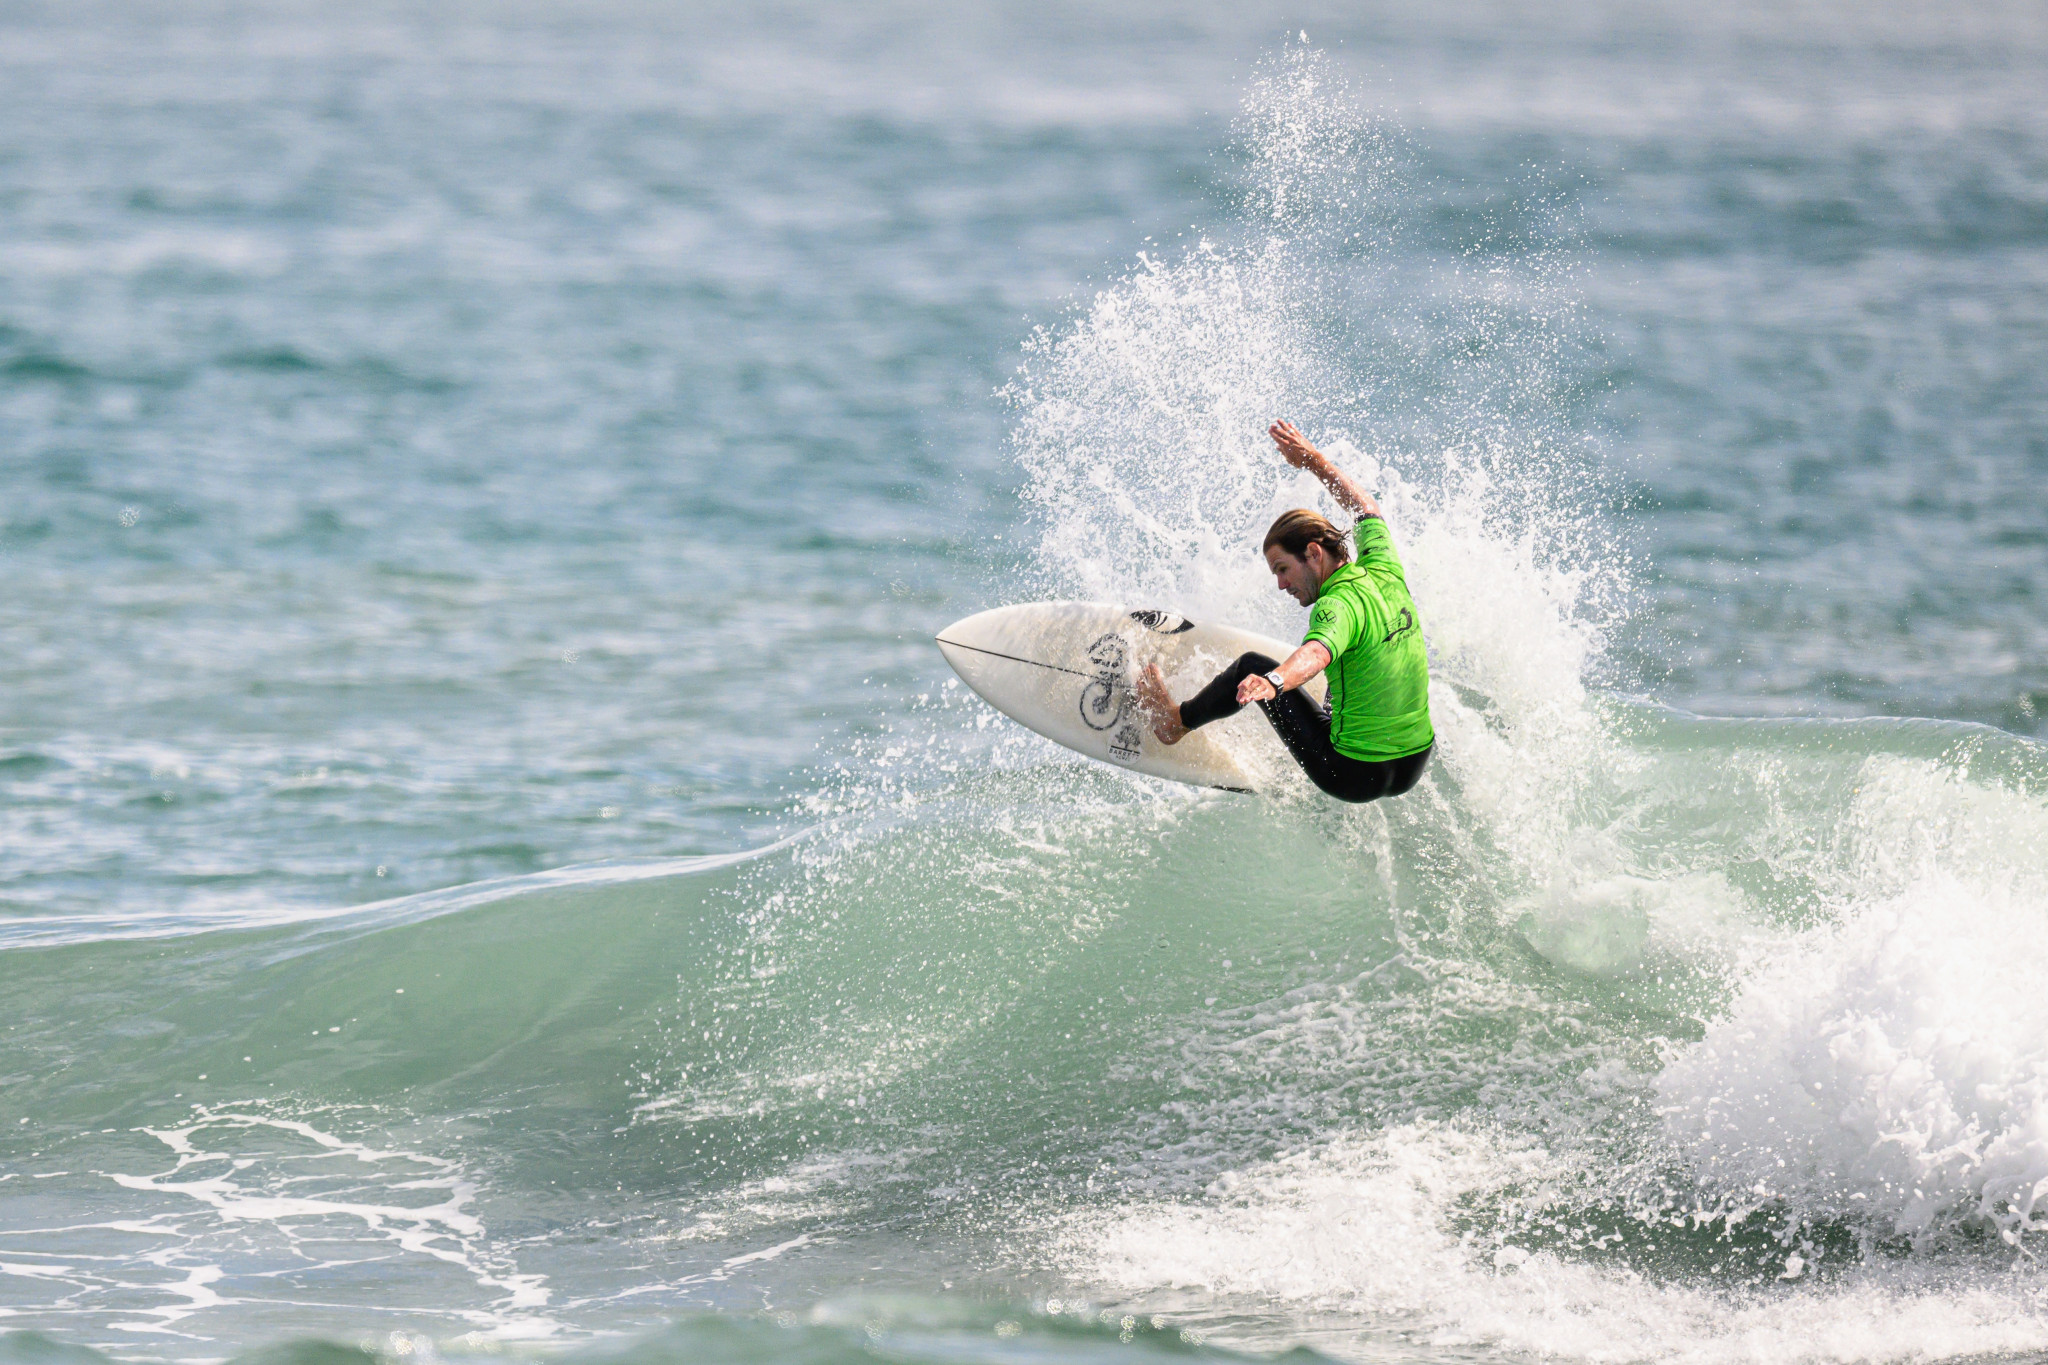 Stairmand shades Medina as intensity increases at World Surfing Games